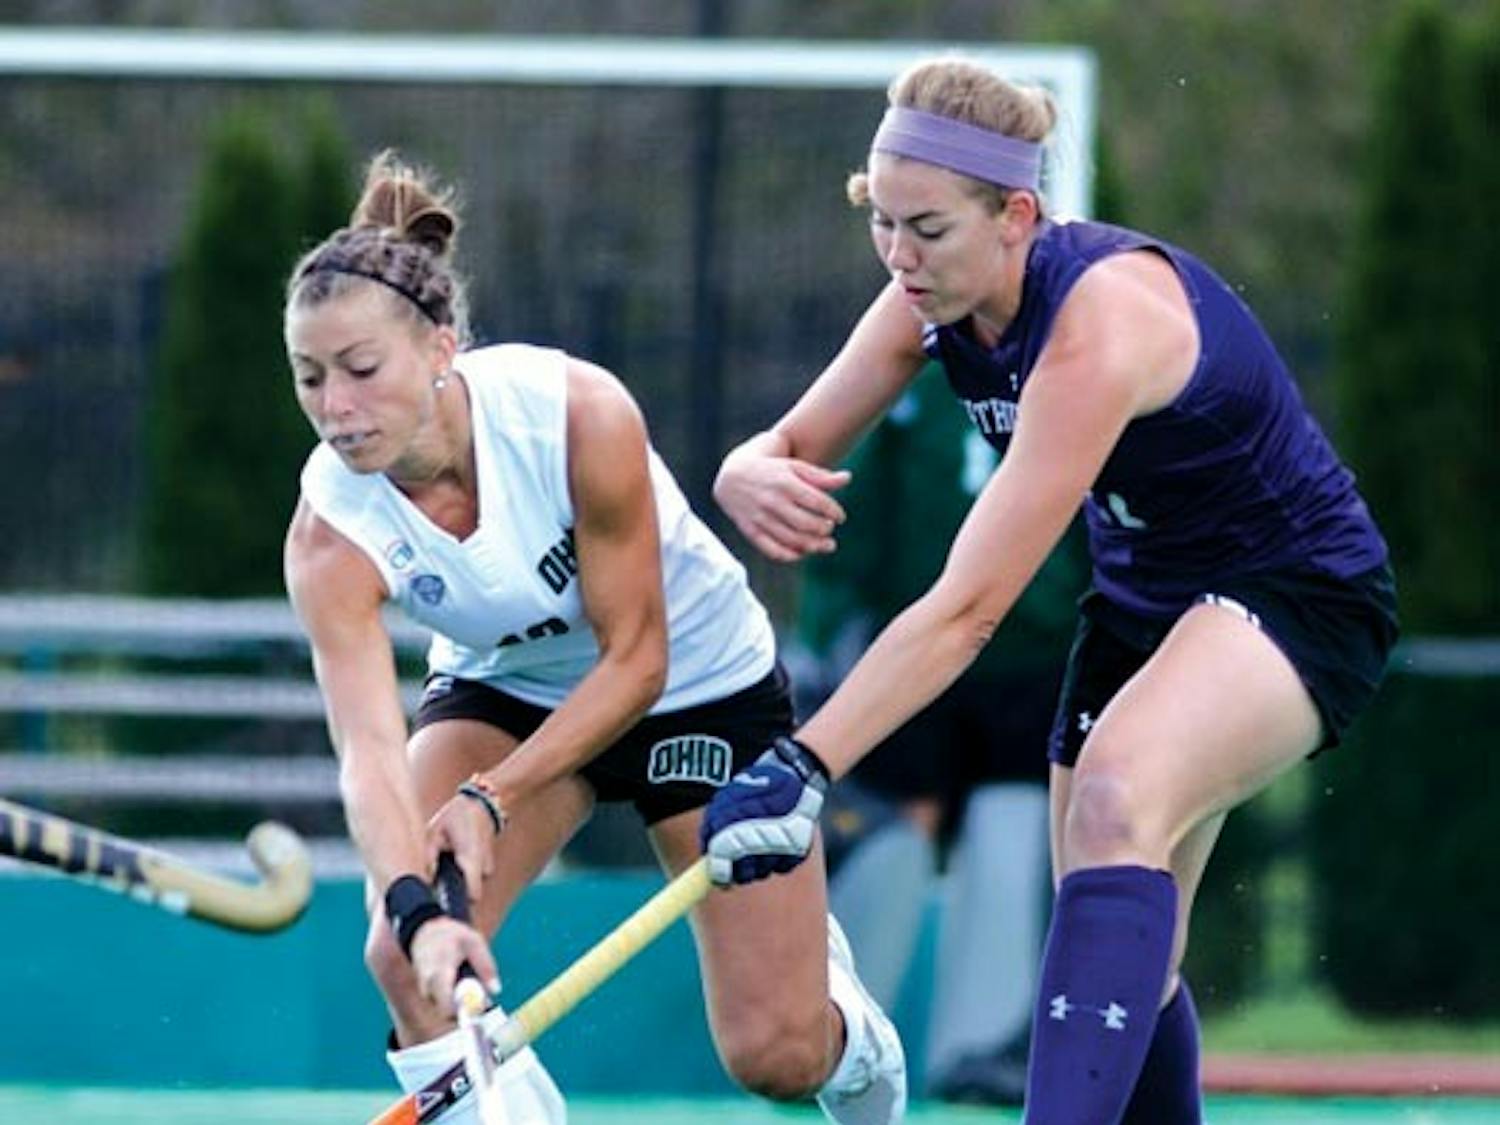 Field Hockey: Match against Miami on its home turf will be 'tough'  